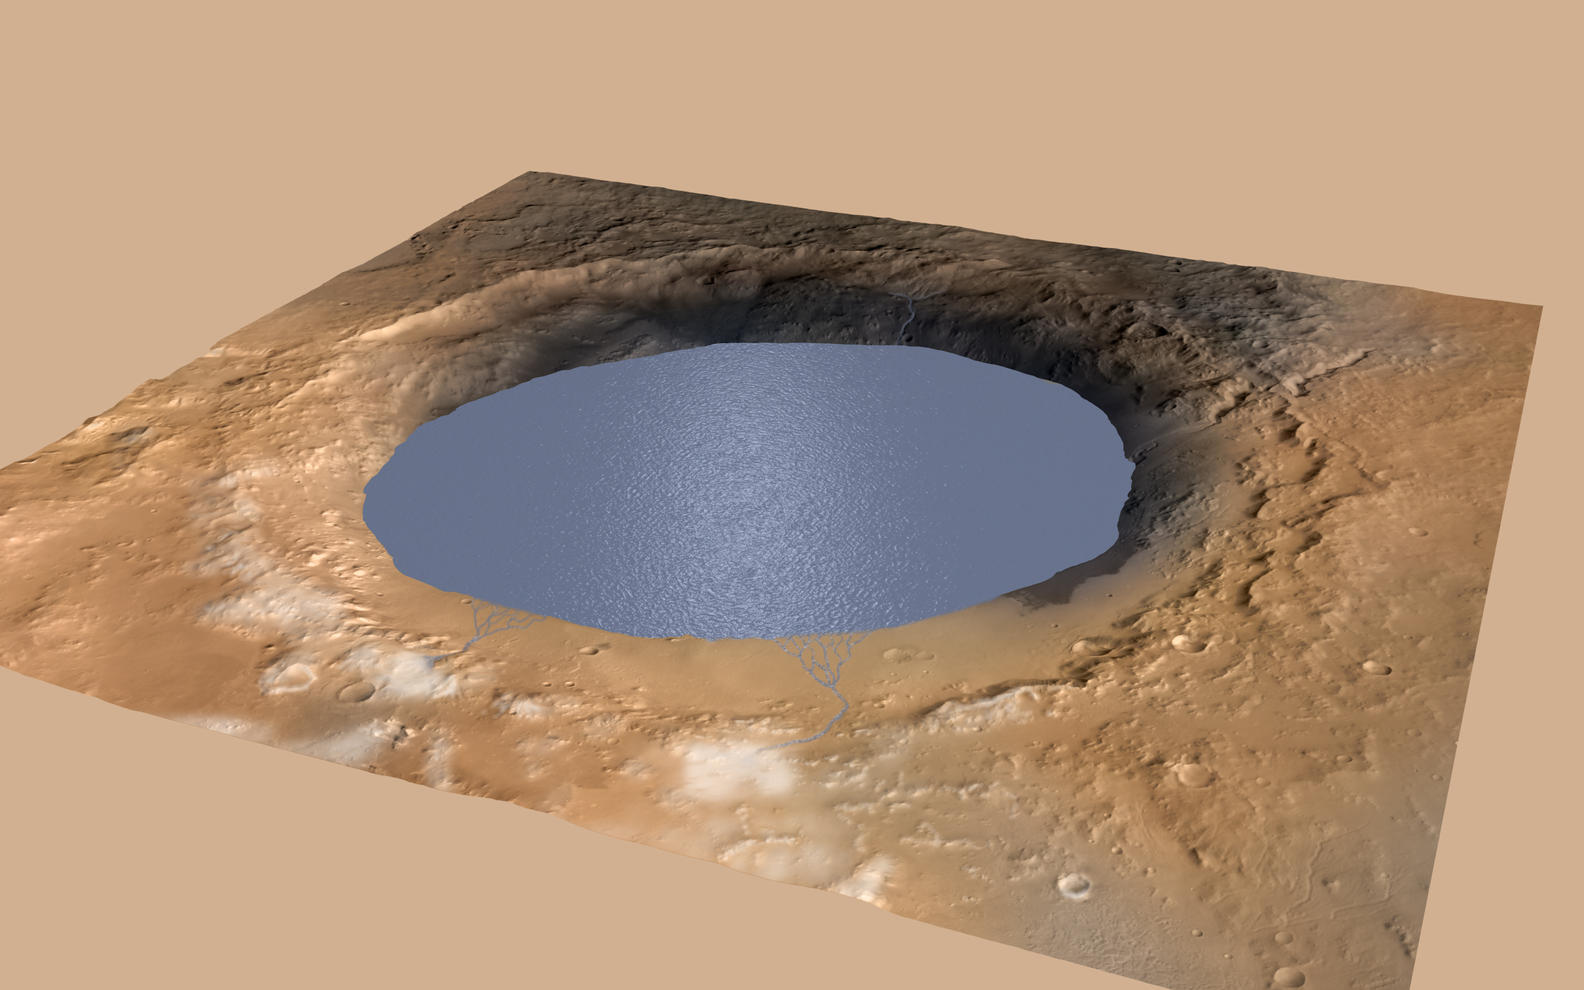 This simulation depicts a lake partially filling Mars' Gale Crater, receiving runoff from snow melting on the crater's rim. Evidence that NASA's Curiosity rover has found of ancient streams, deltas and lakes suggests the crater held a lake such as this more than three billion years ago.